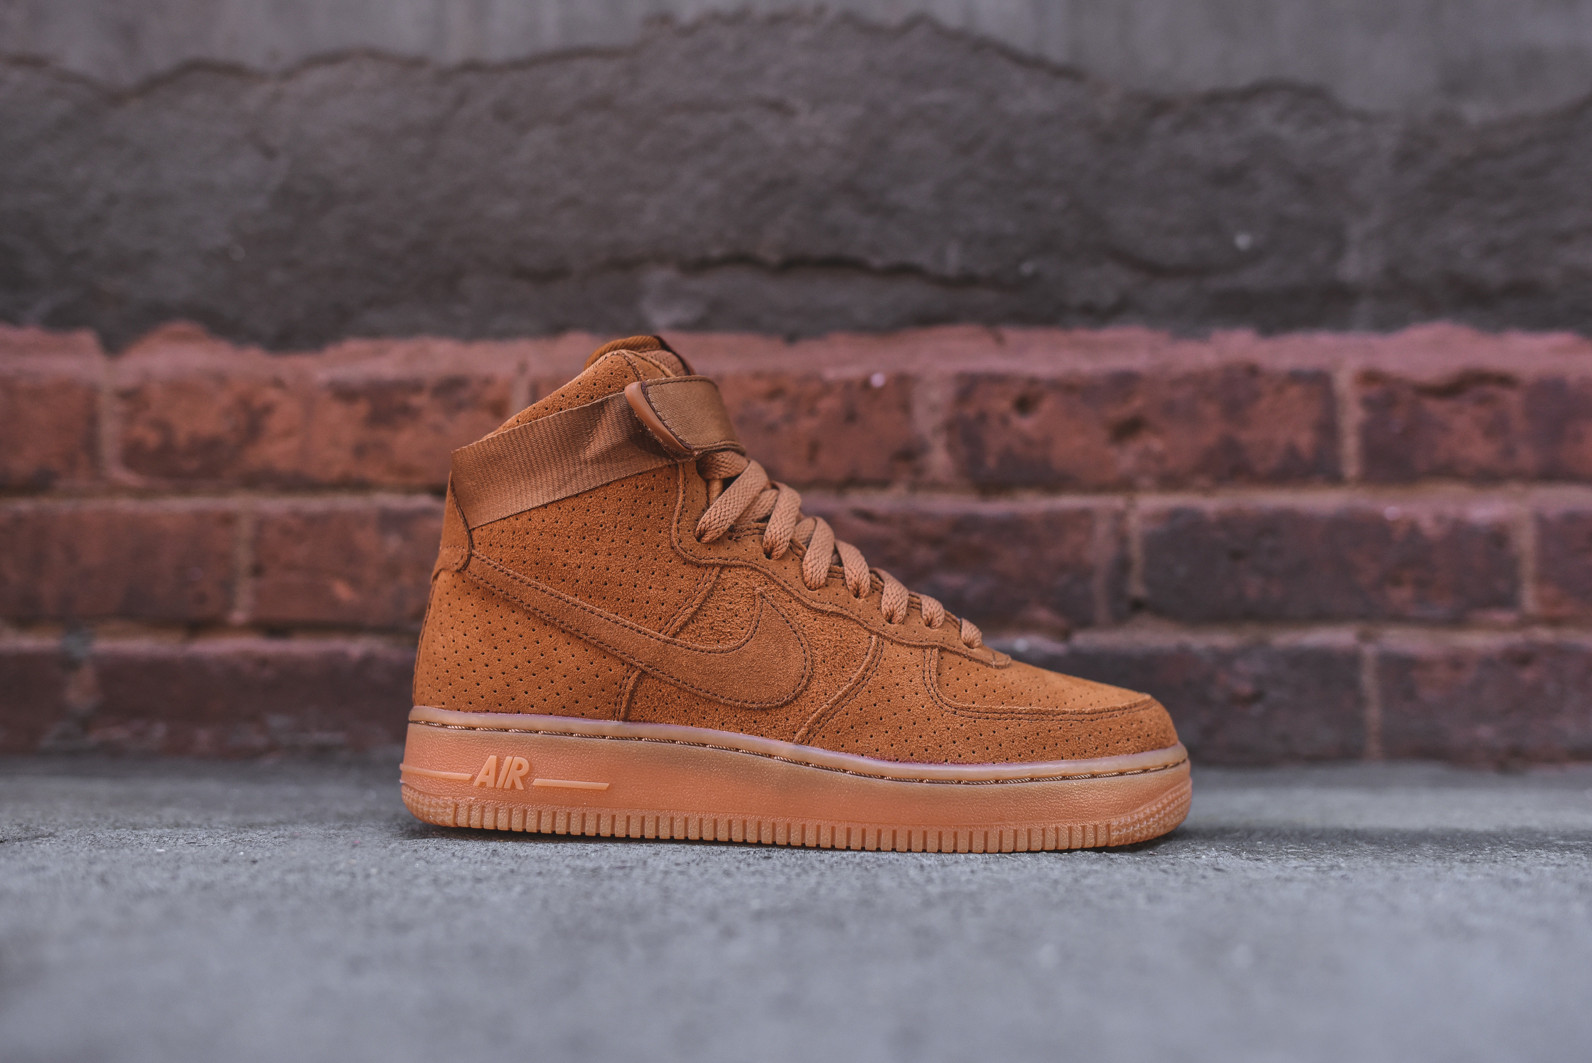 Nike Air Force 1 Perforated Suede Pack 